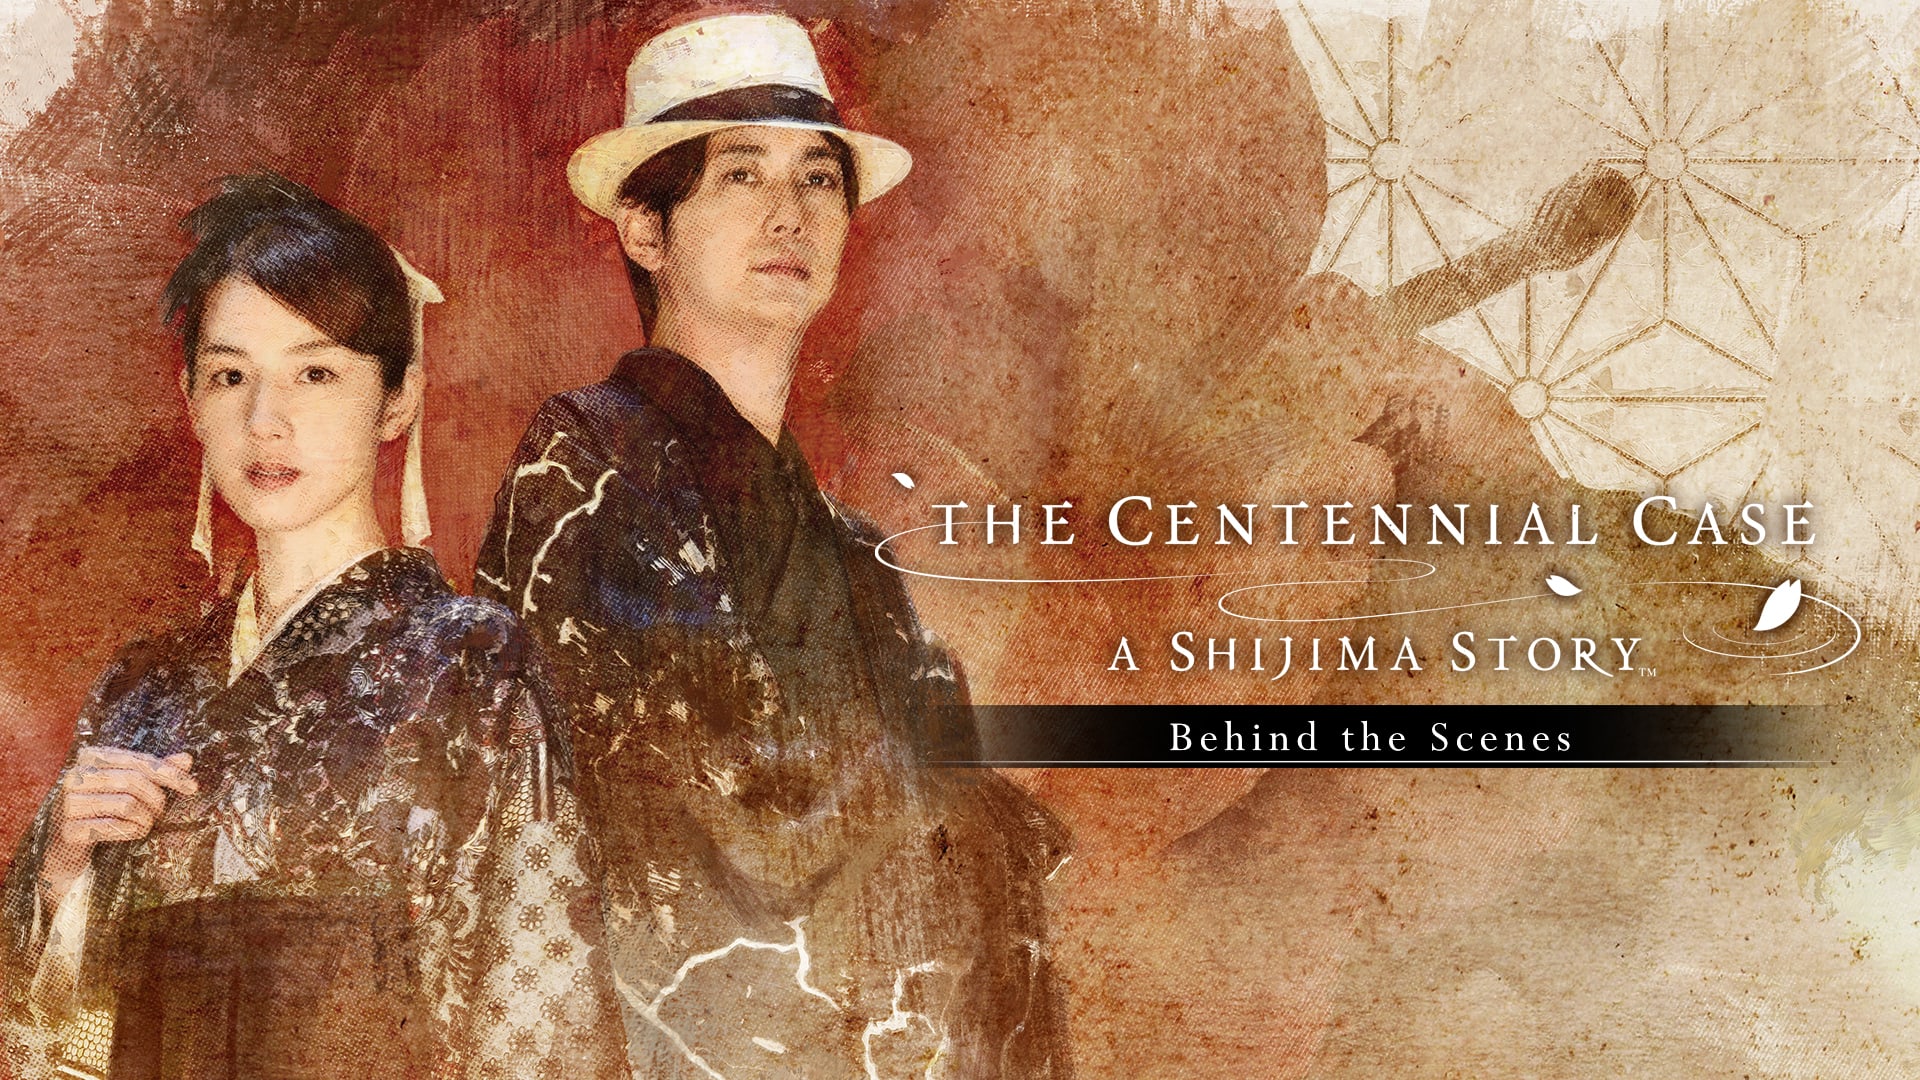 The Centennial Case: A Shijima Story BEHIND THE SCENES